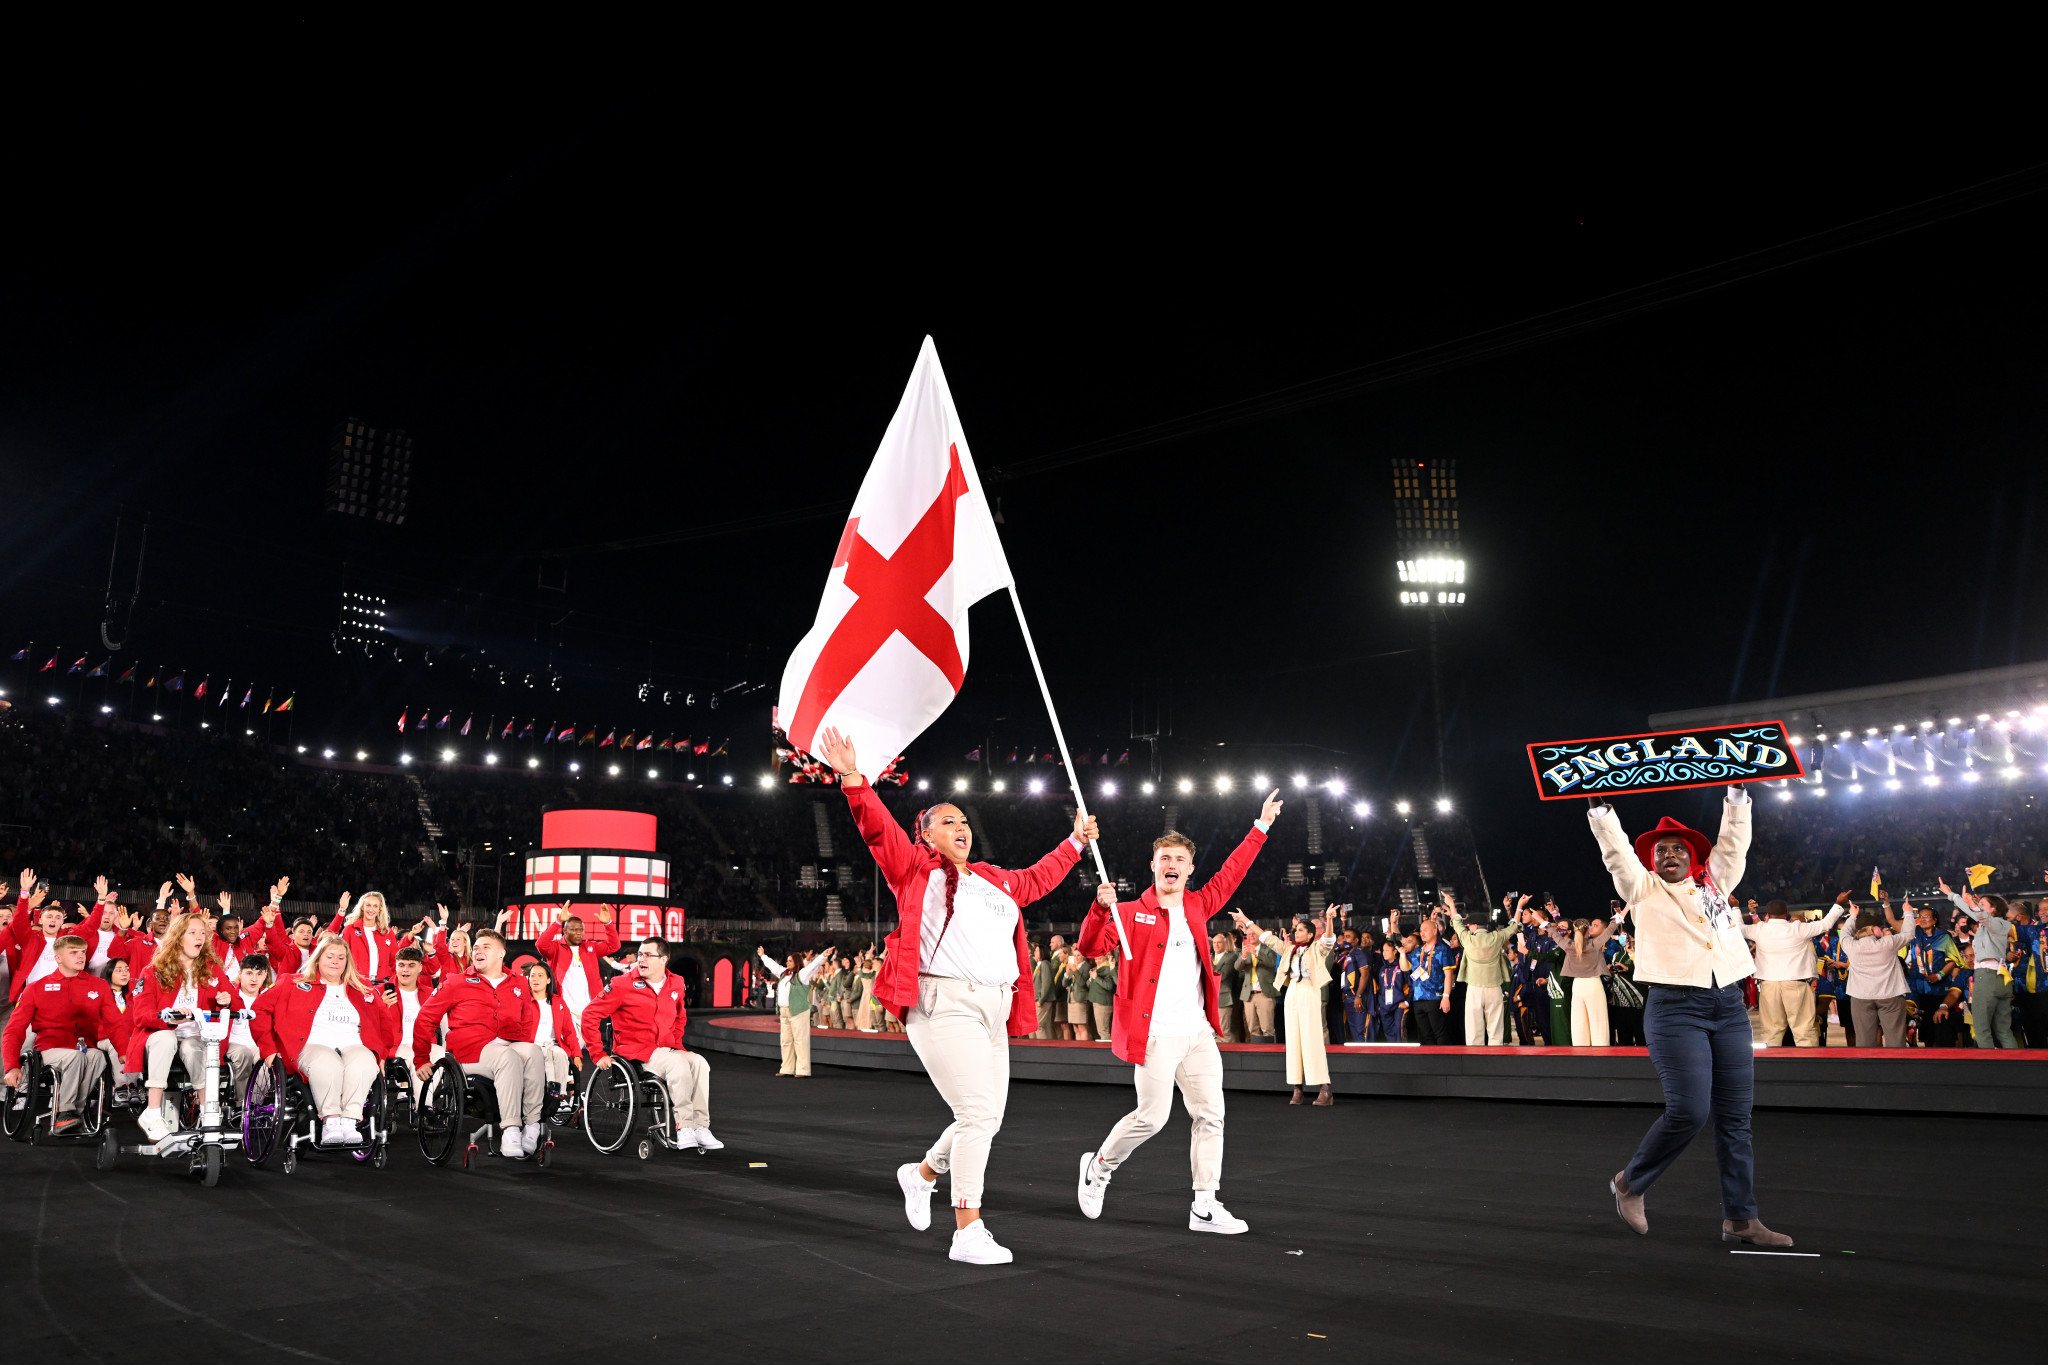 England won 176 medals at Birmingham 2022, the highest number at the Commonwealth Games ever for the country ©Getty Images